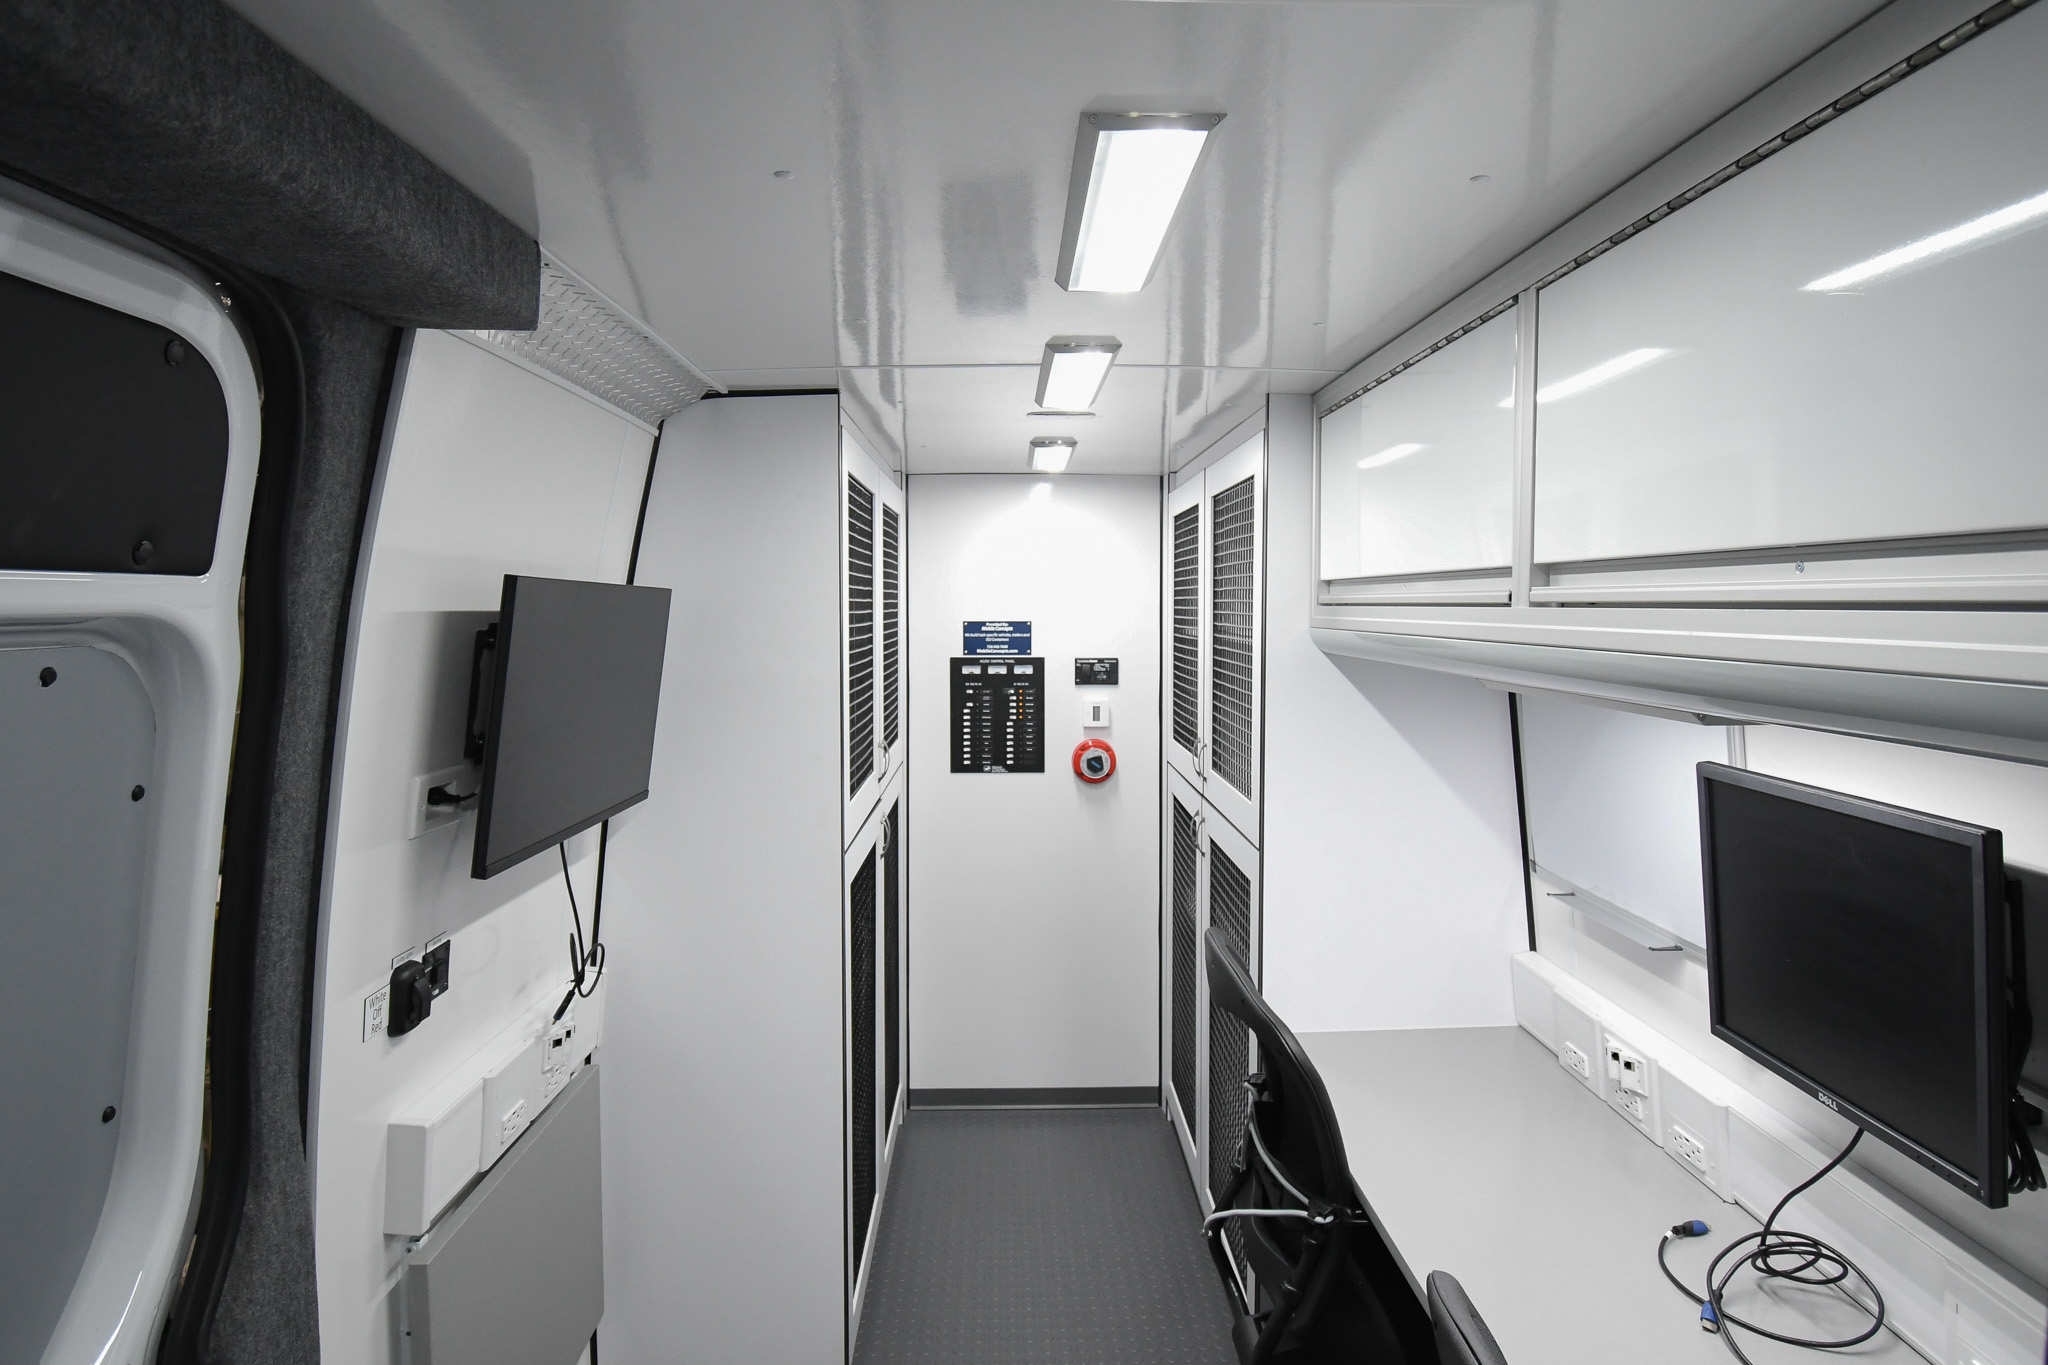 A front-to-back view inside the unit for Johnstown, PA.